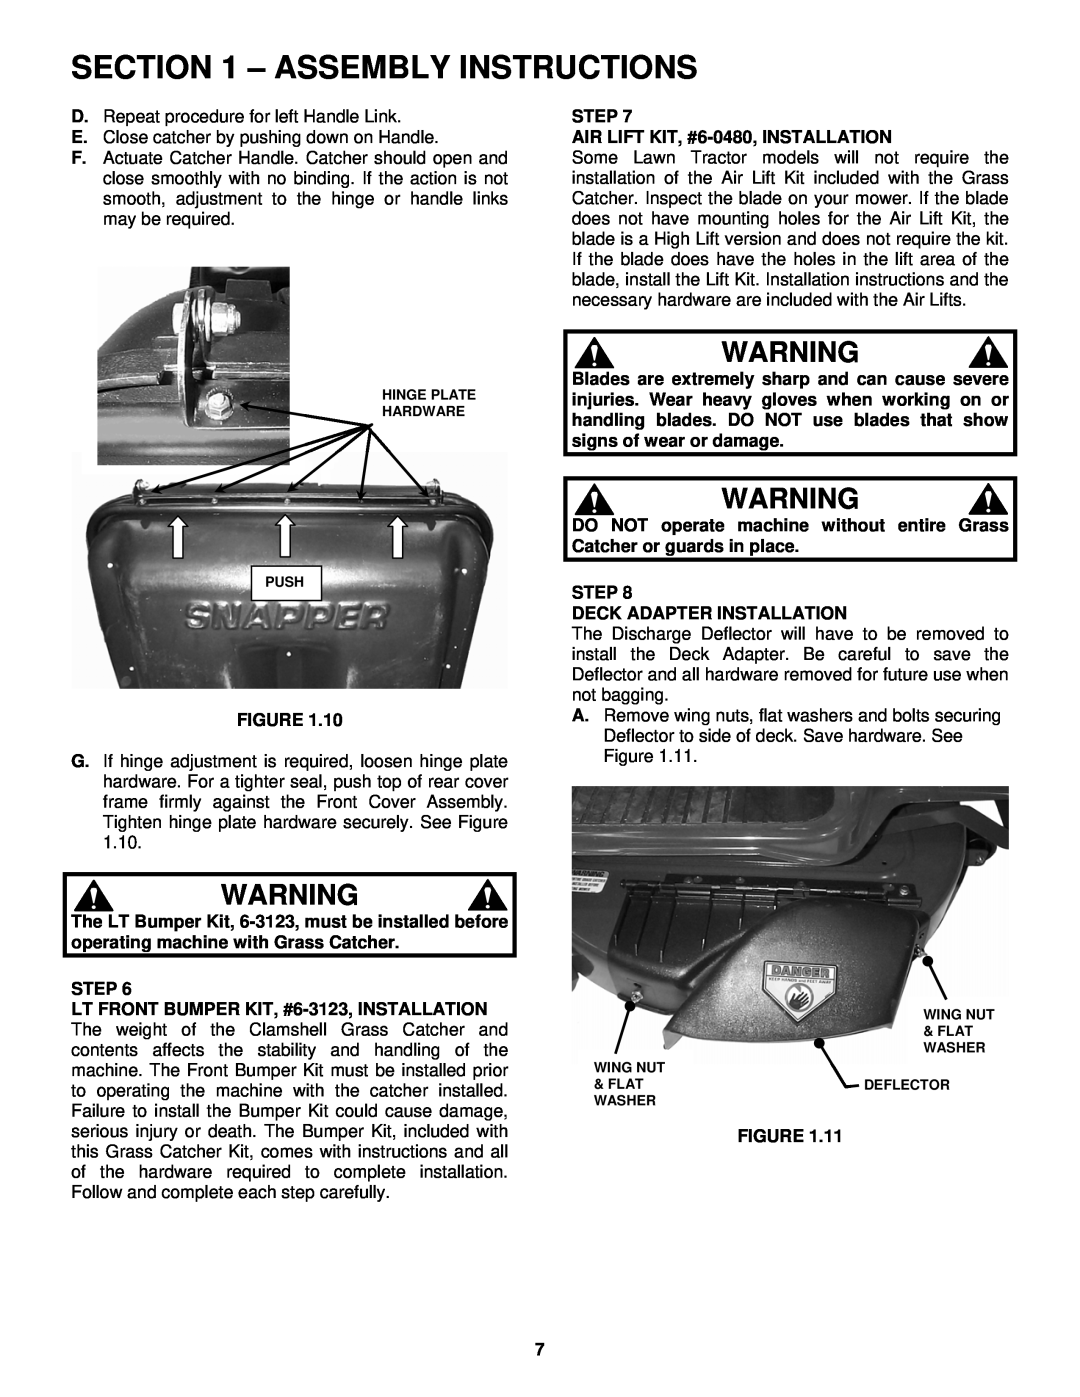 Snapper 6-3131 manual STEP AIR LIFT KIT, #6-0480, INSTALLATION, Step Deck Adapter Installation, Assembly Instructions 